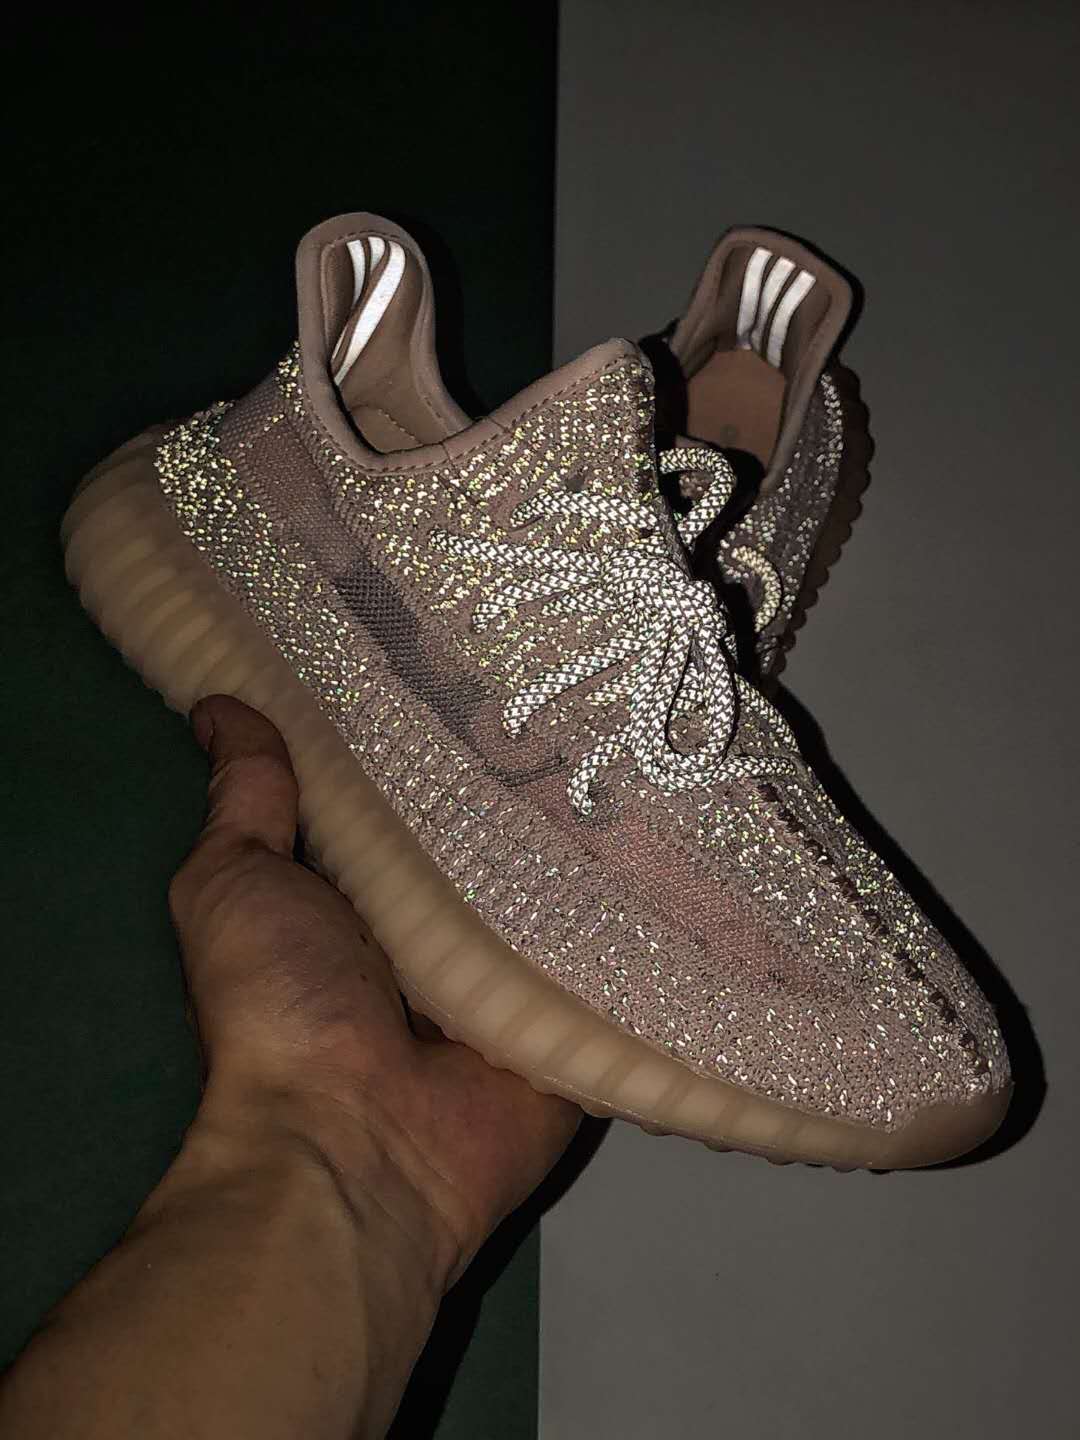 Adidas Yeezy Boost 350 V2 Synth Reflective FV5666 - Limited Edition Sneakers